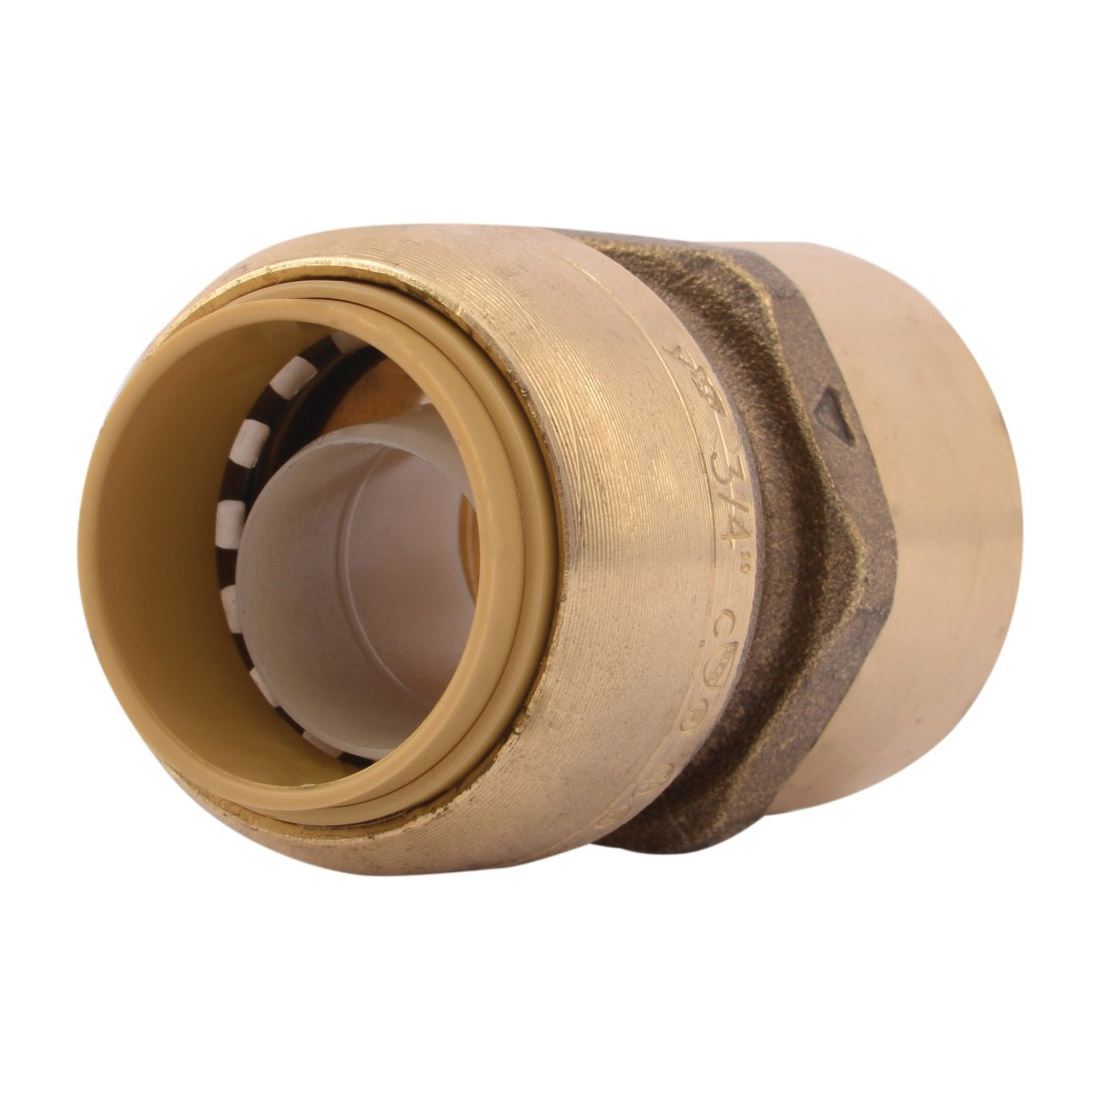 Sharkbite® U088LF Straight Female Connector, 3/4 in Nominal, Push-Fit x FNPT End Style, Brass, Import